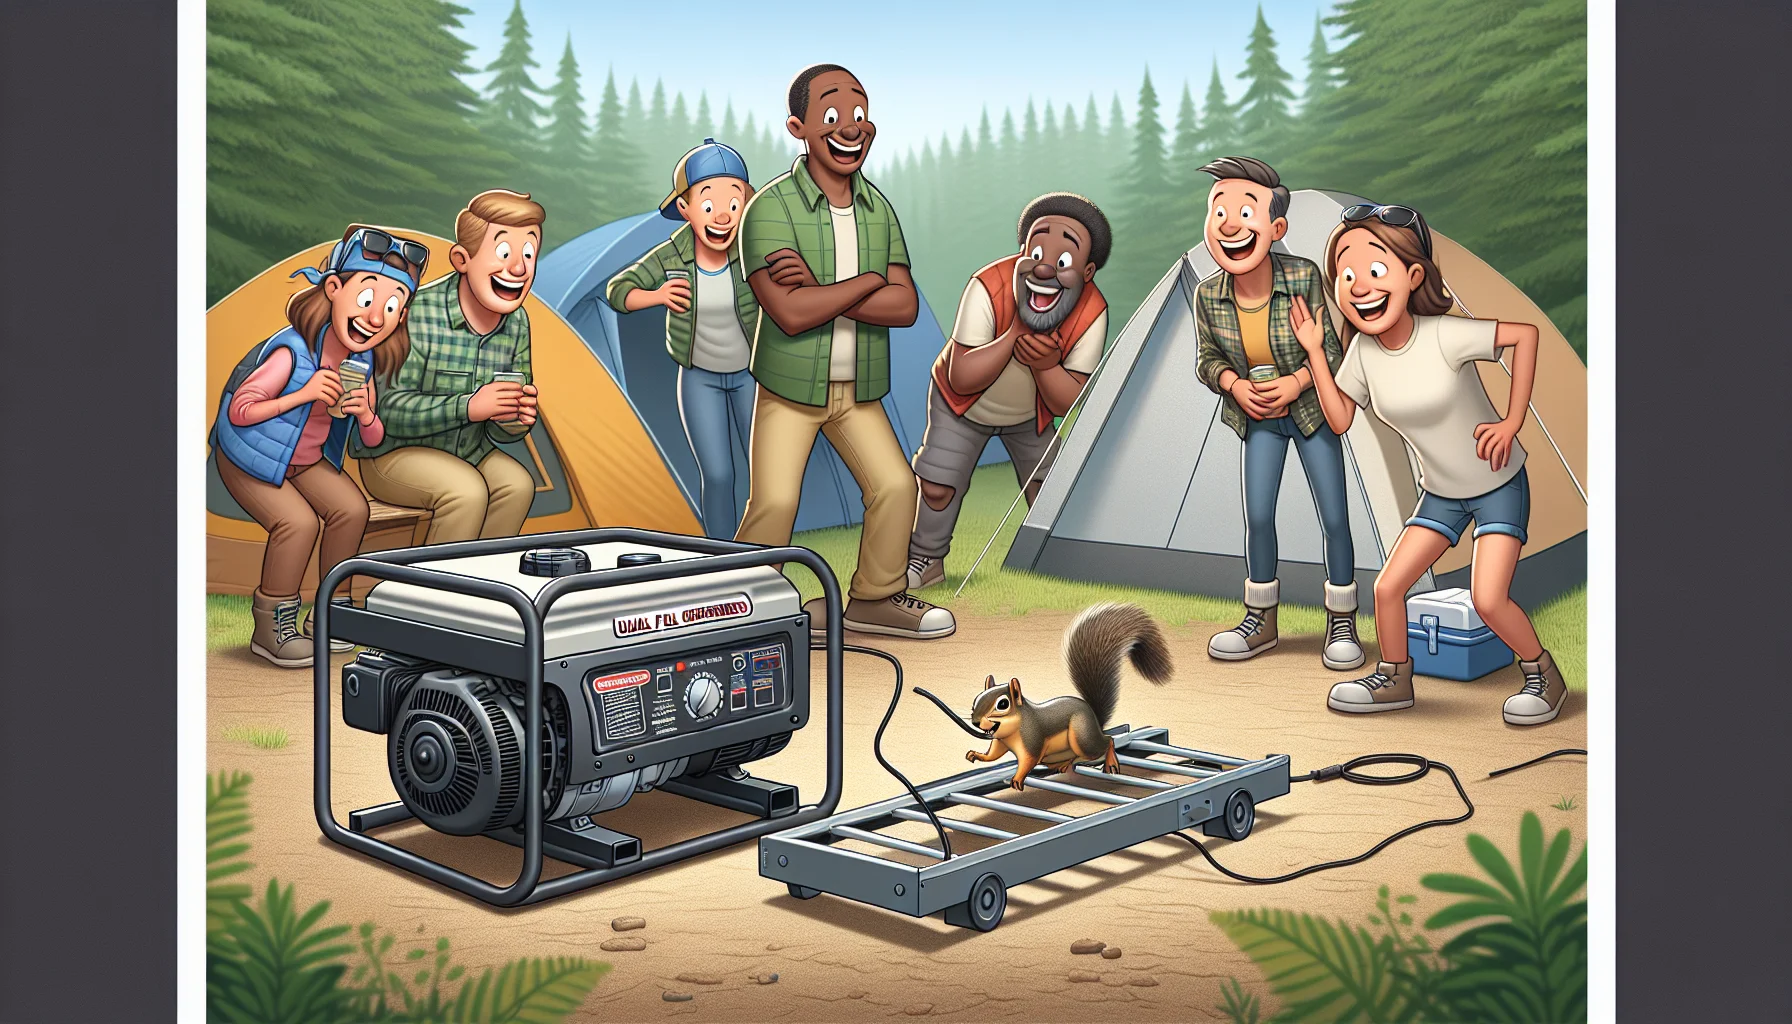 Illustrate a humorous and engaging scenario that encapsulates the use of dual fuel generators. Show a scene in a camping ground where diverse campers, including a Caucasian male, a Hispanic female, and a Black male, are cheerfully gathered around a pair of dual fuel generators. They are amused as they watch a squirrel attempting to run on top of one generator as if it's a treadmill to operate it, thereby 'generating electricity'. The setting is in daylight, and the generators resemble those typically used in outdoor recreational activities, sturdy and ready for operation.